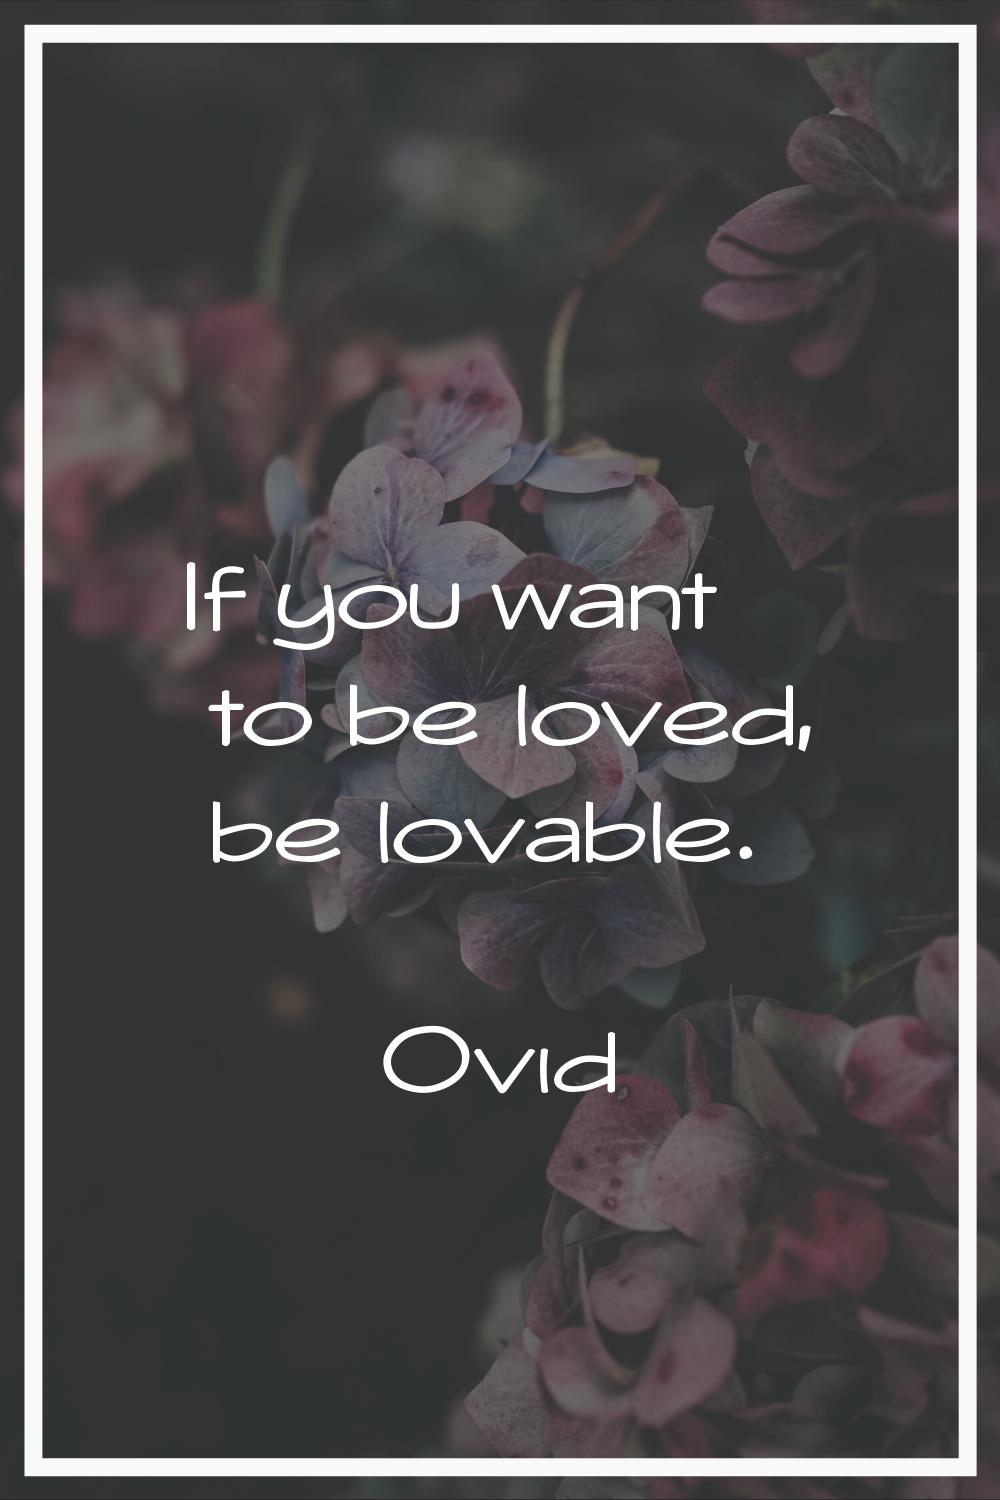 If you want to be loved, be lovable.